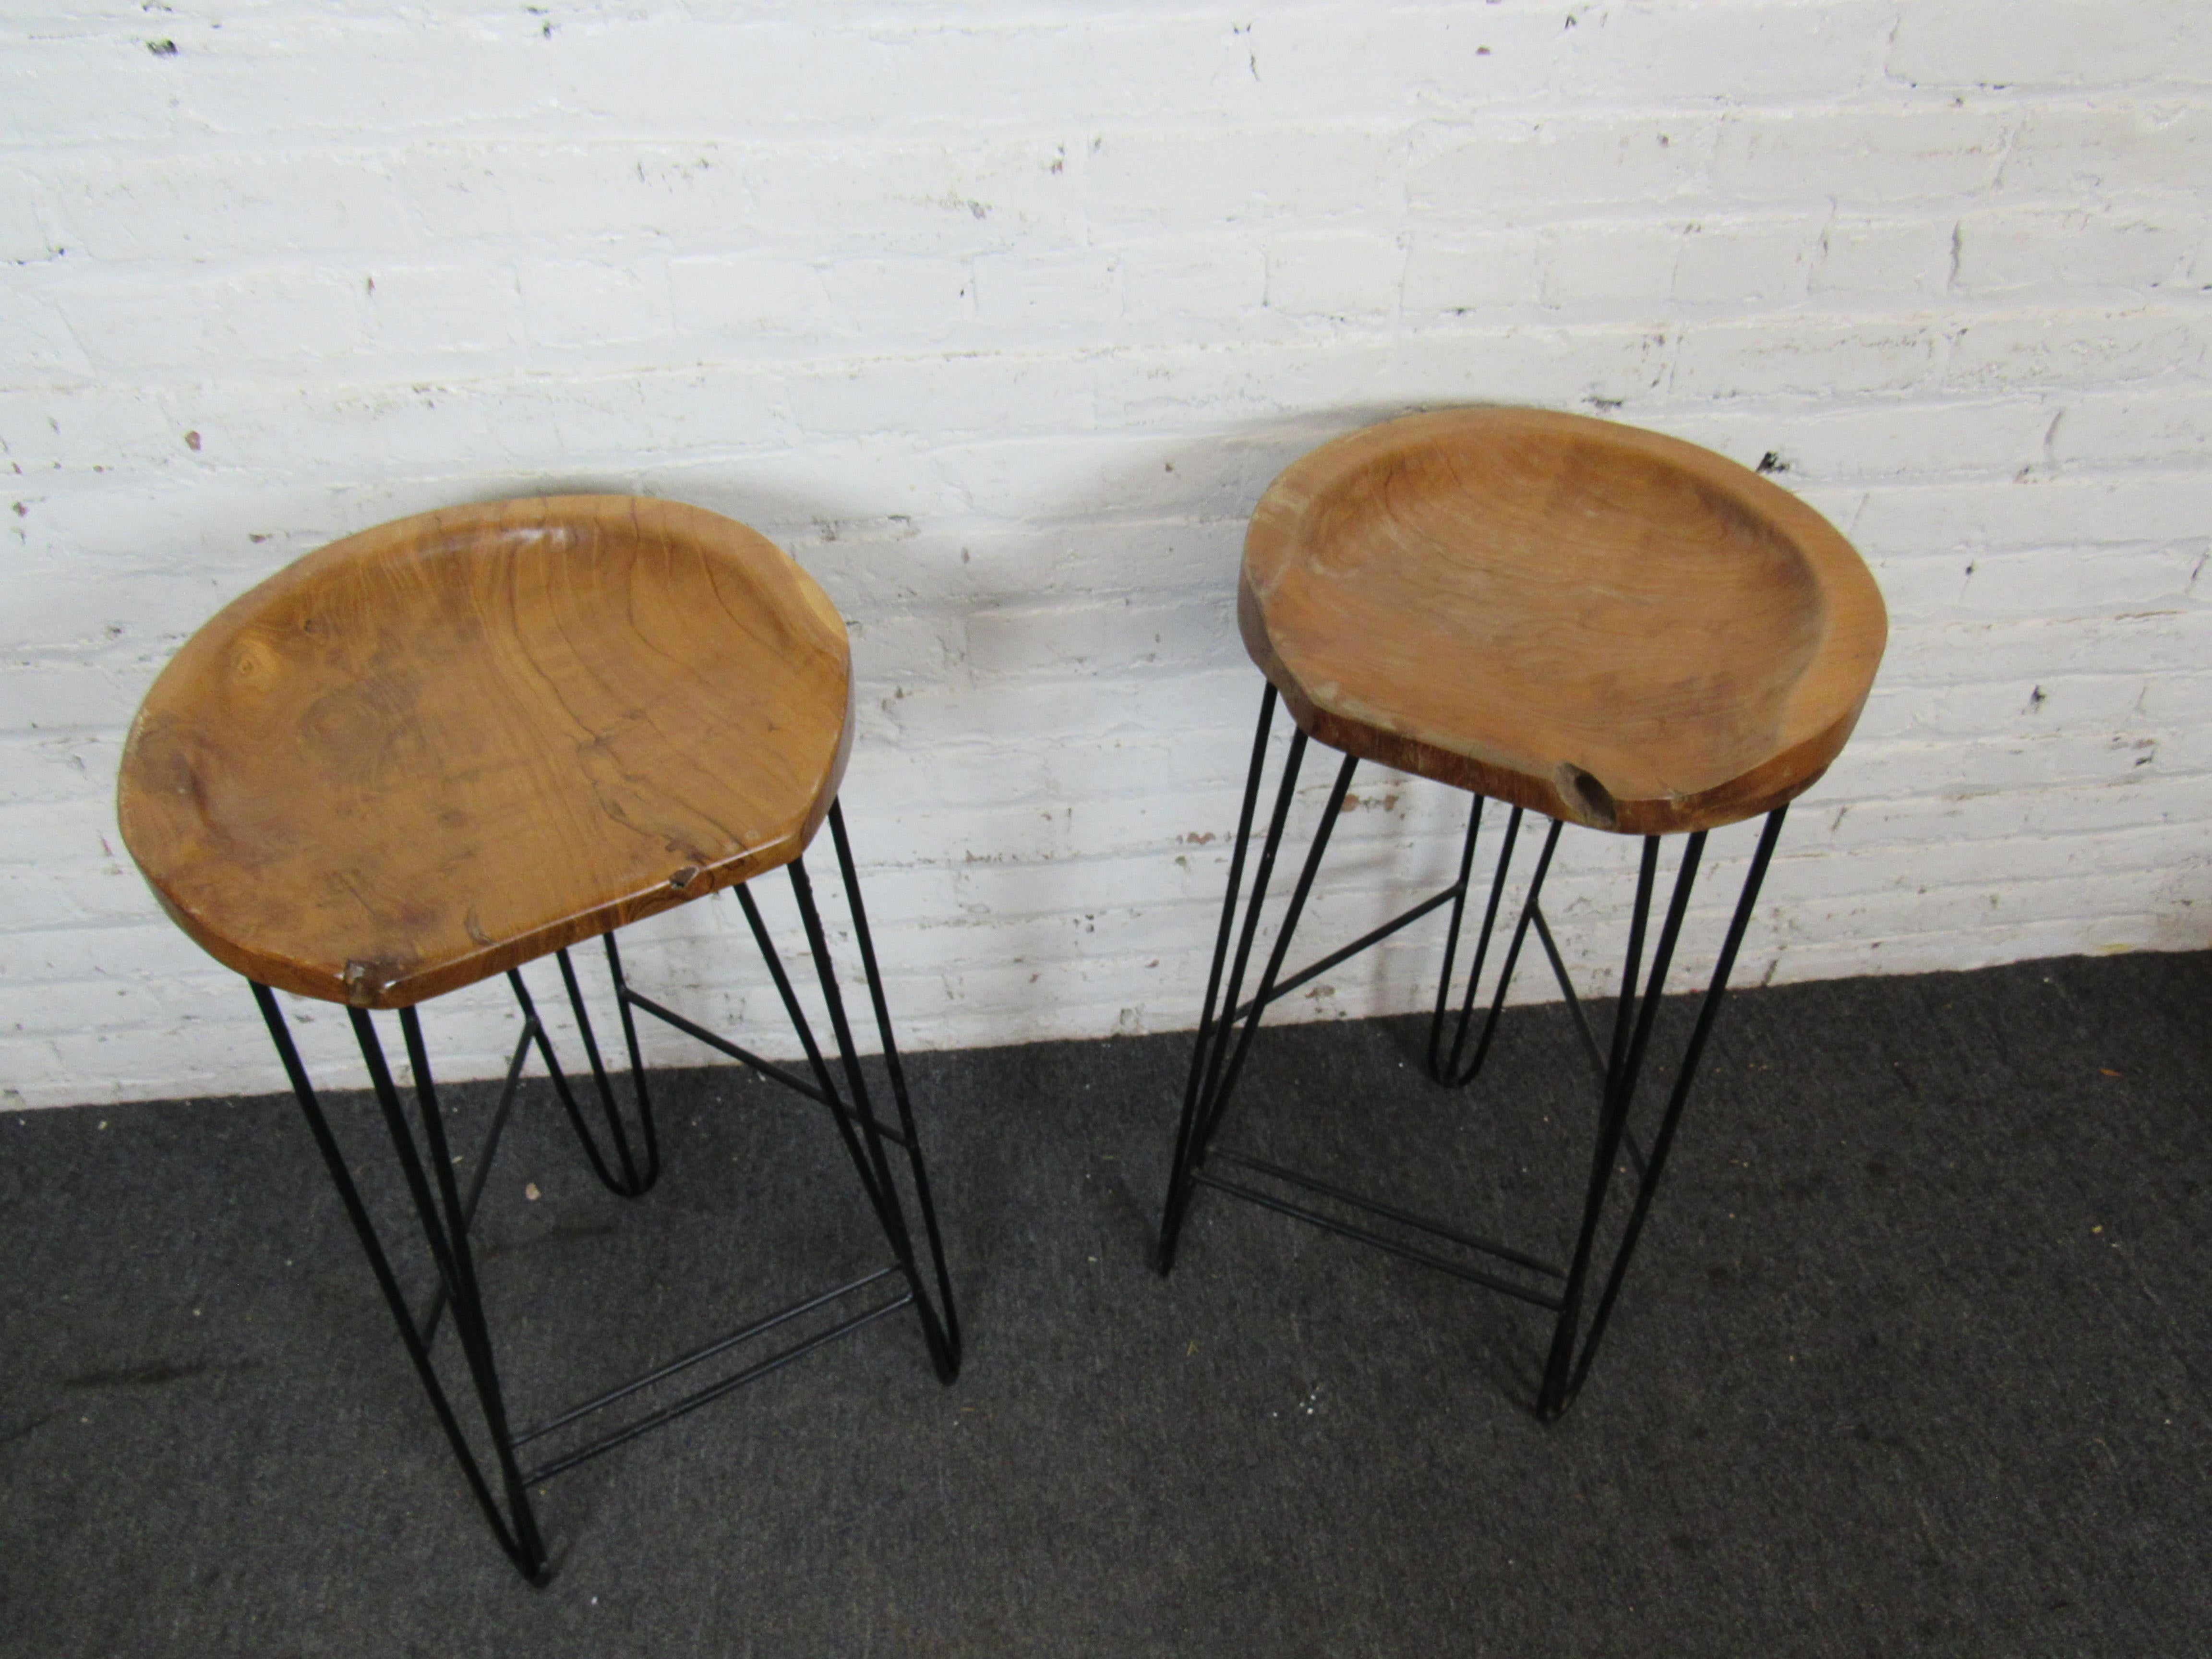 This pair of unique vintage bar stools combines sculpted wooden seats with iron bases. Please confirm item location with seller (NY/NJ).